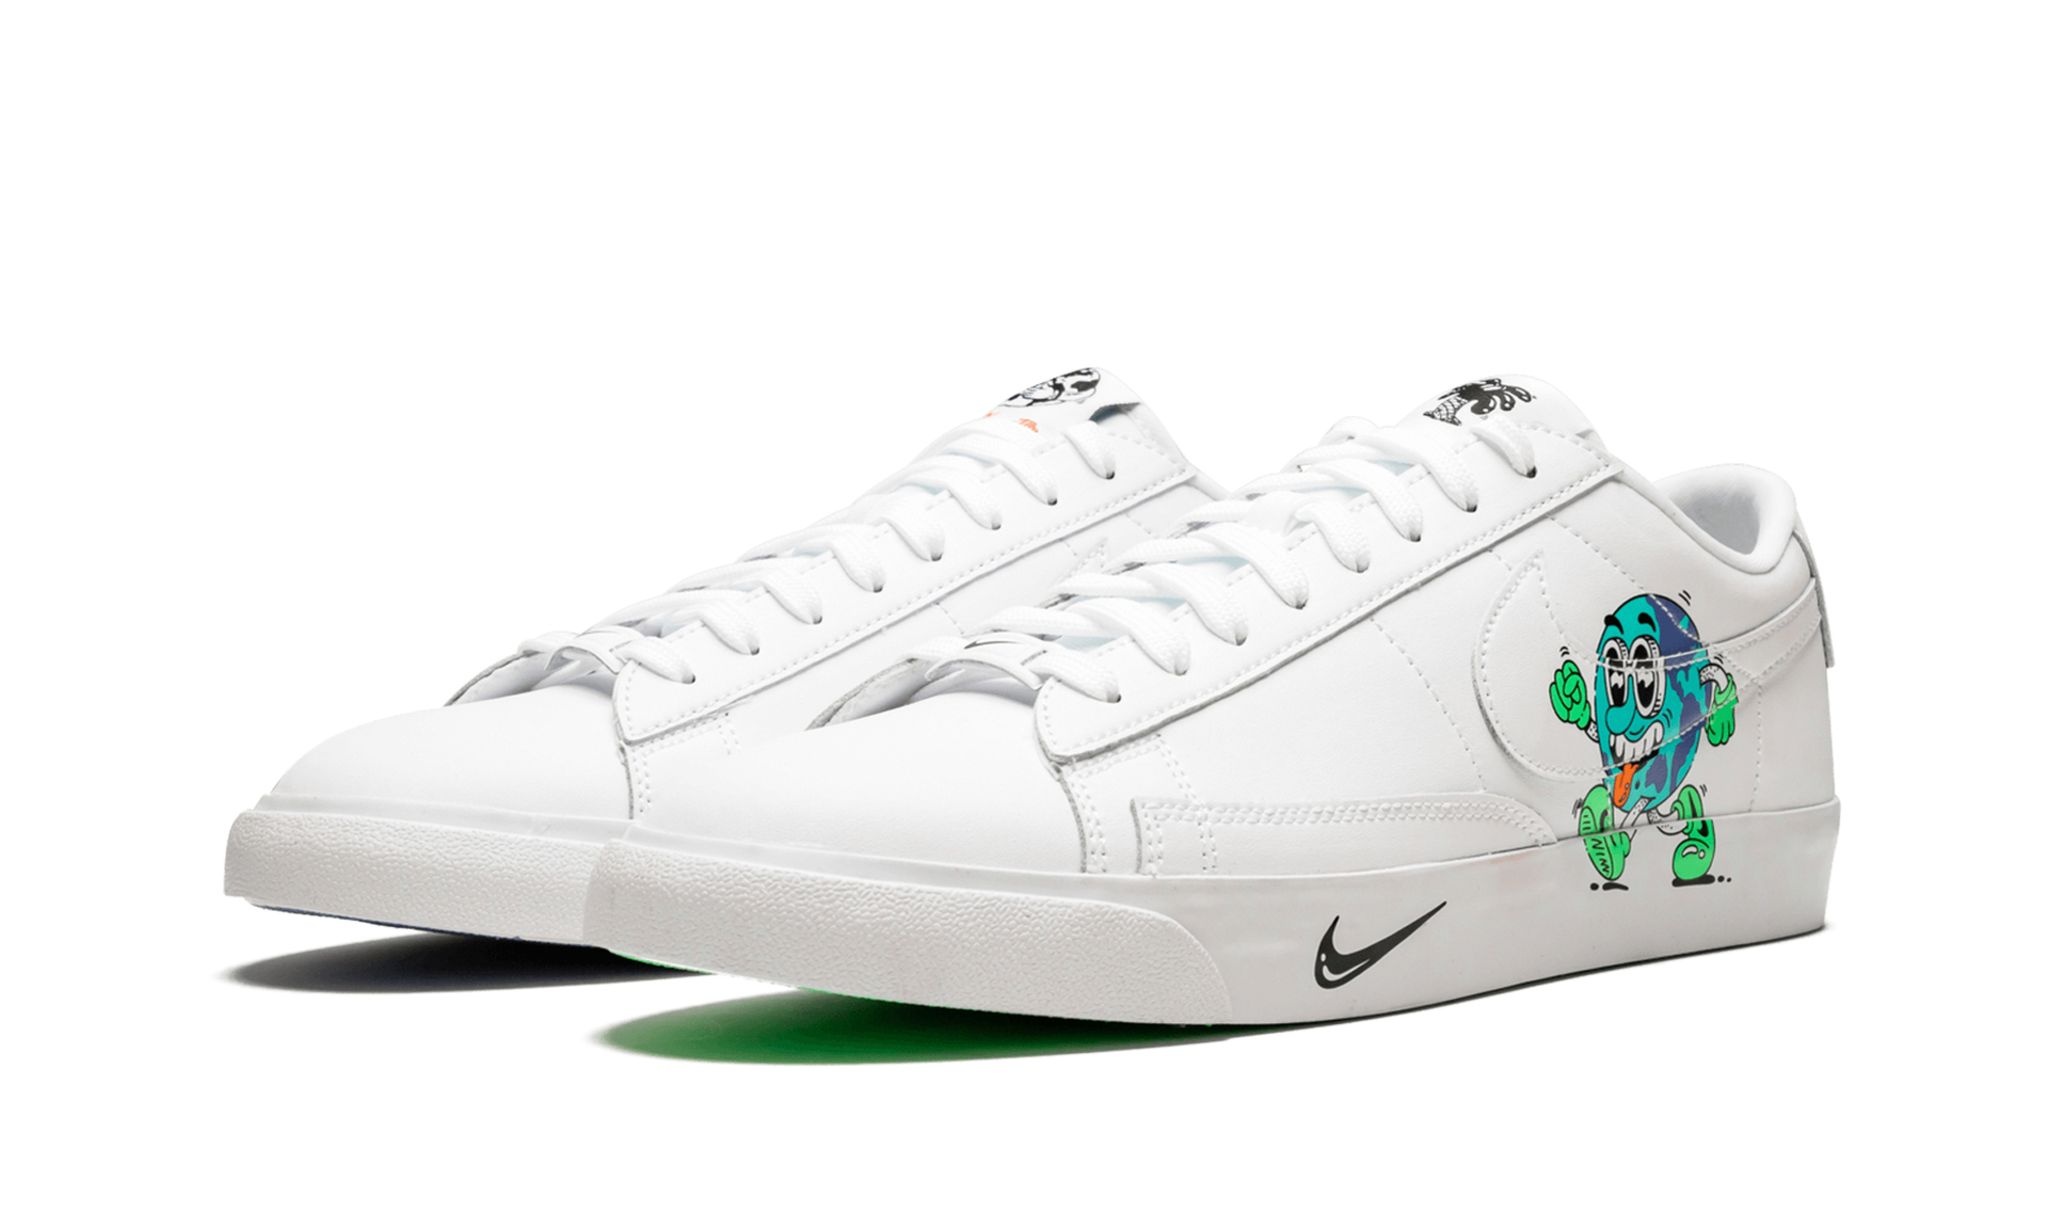 Blazer Low Flyleather QS "Earth Day" - 2